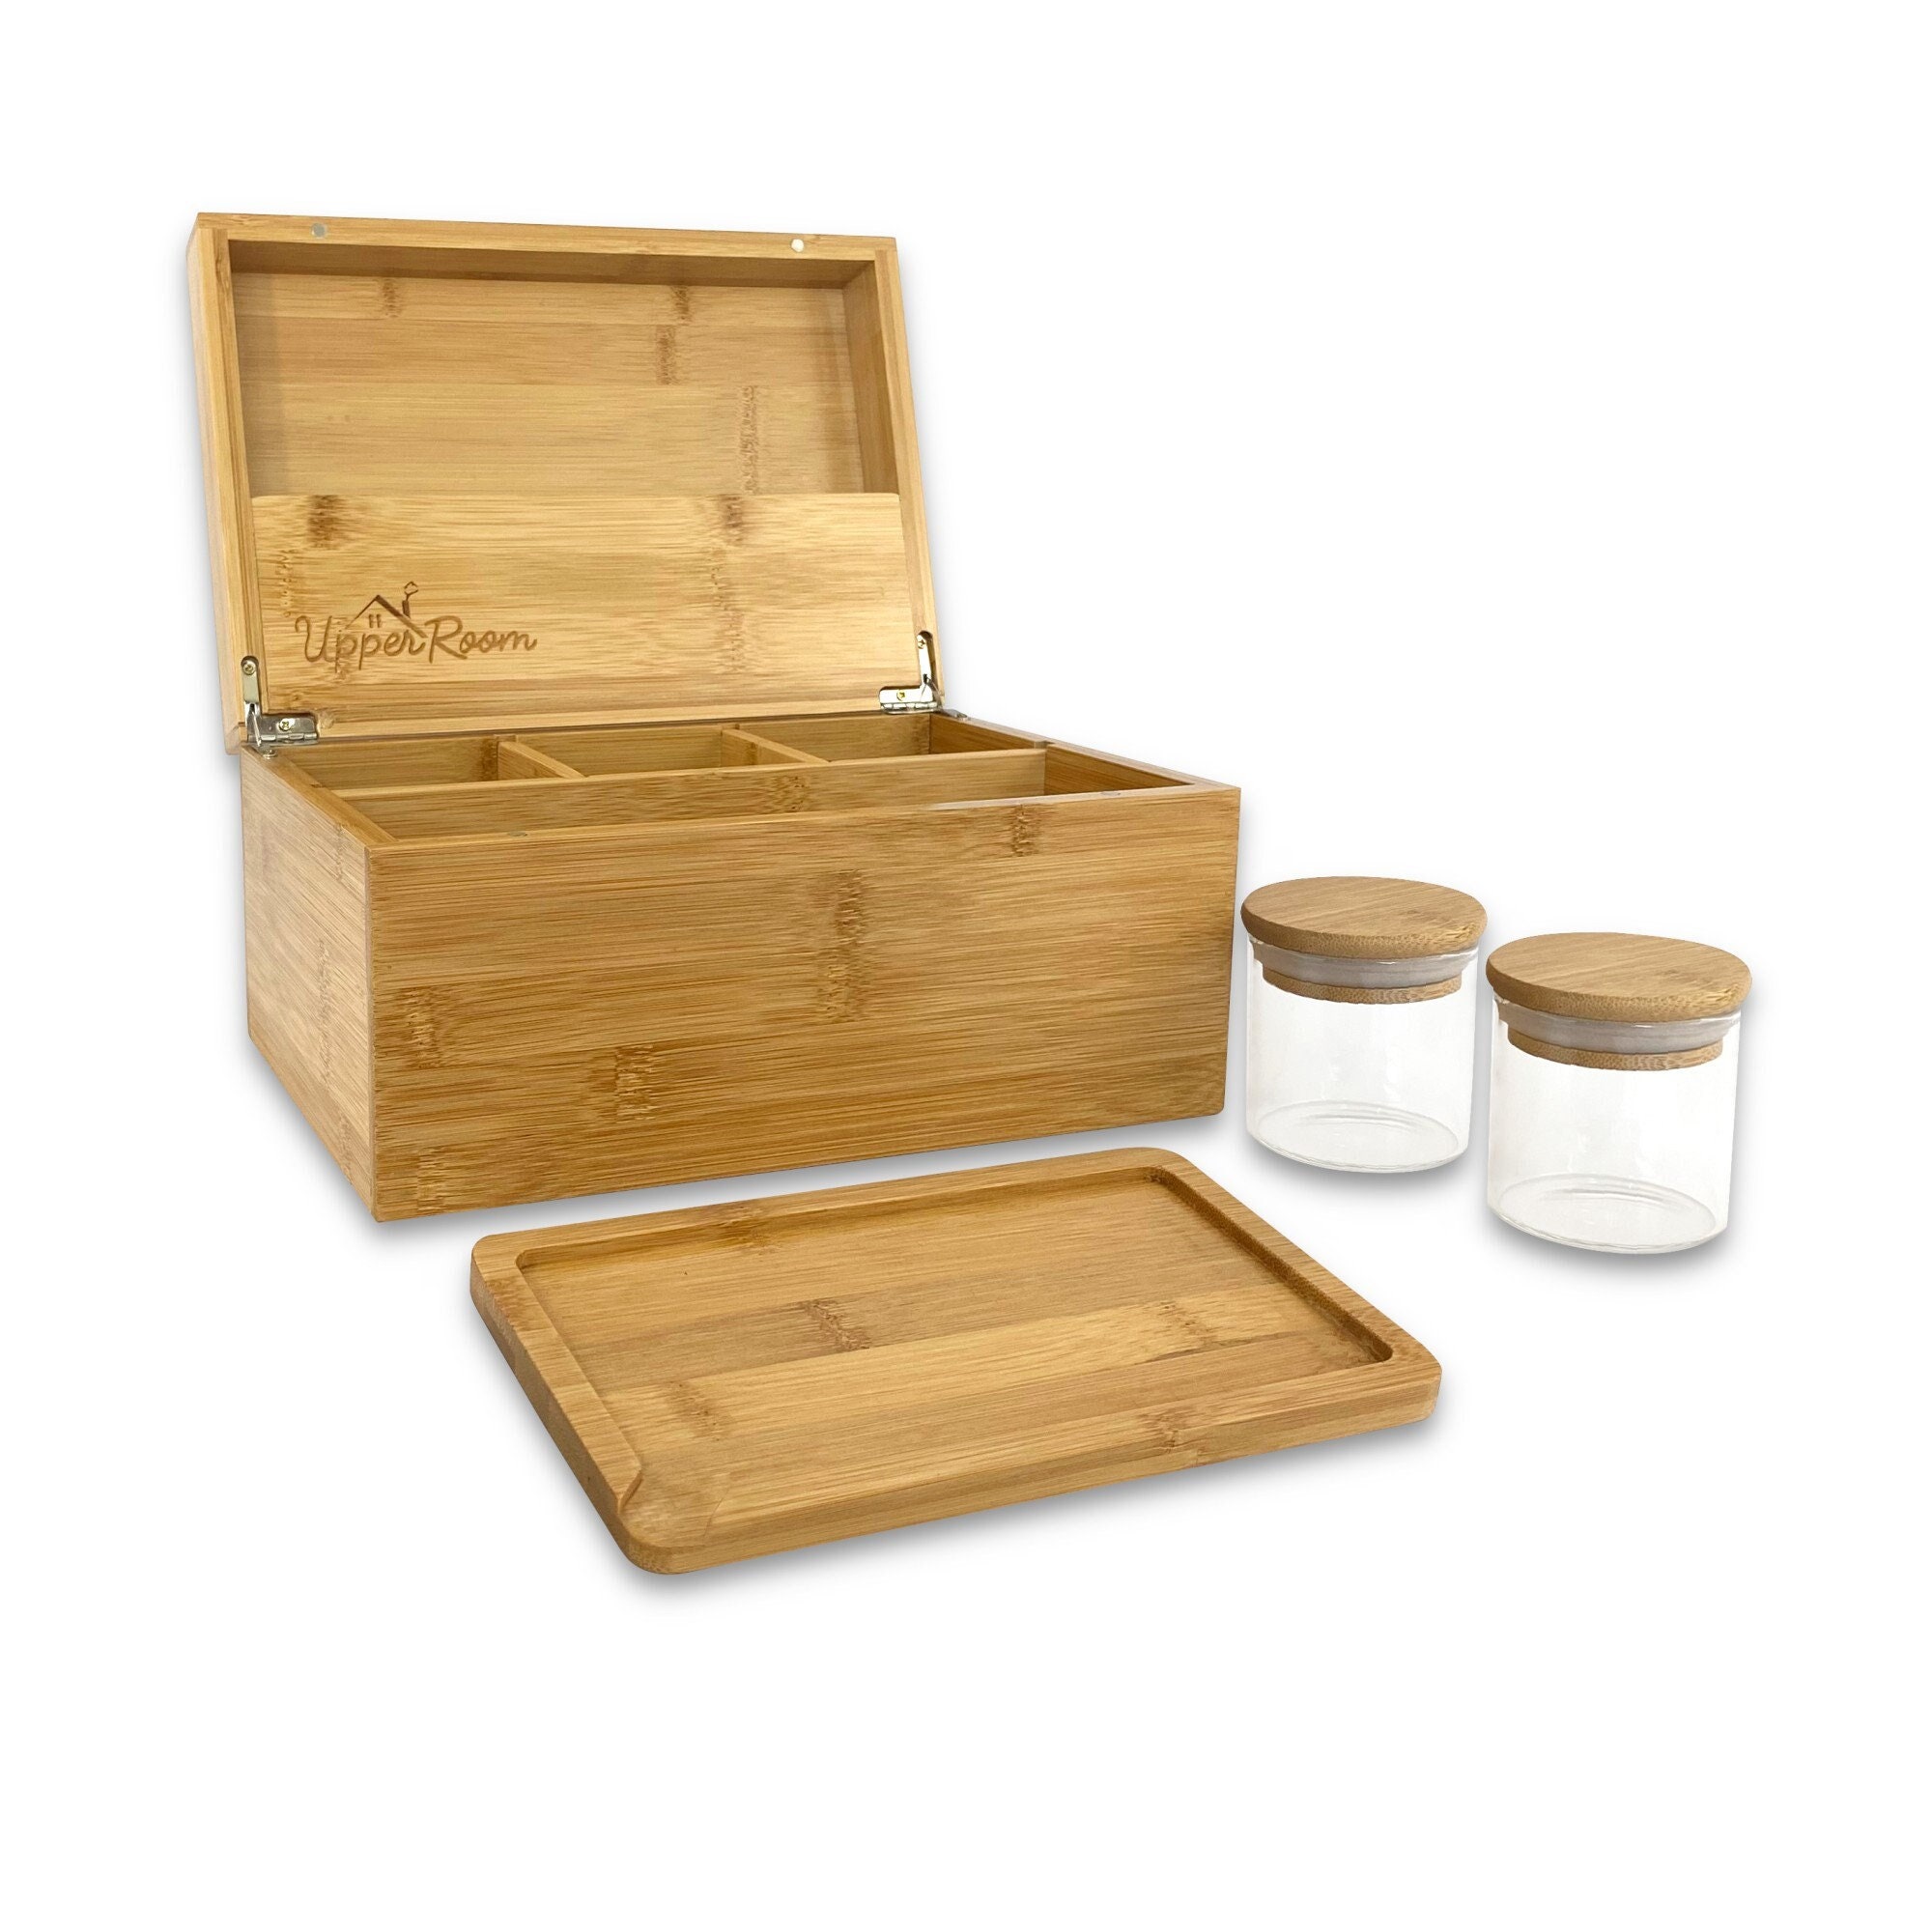 Bamboo Stash Kit, Storage Box, Rolling Tray, Rolling Kit, Rolling Tray Box  with Lock, Smell Proof Box, Bamboo Rolling Tray Bundle, Lock Box